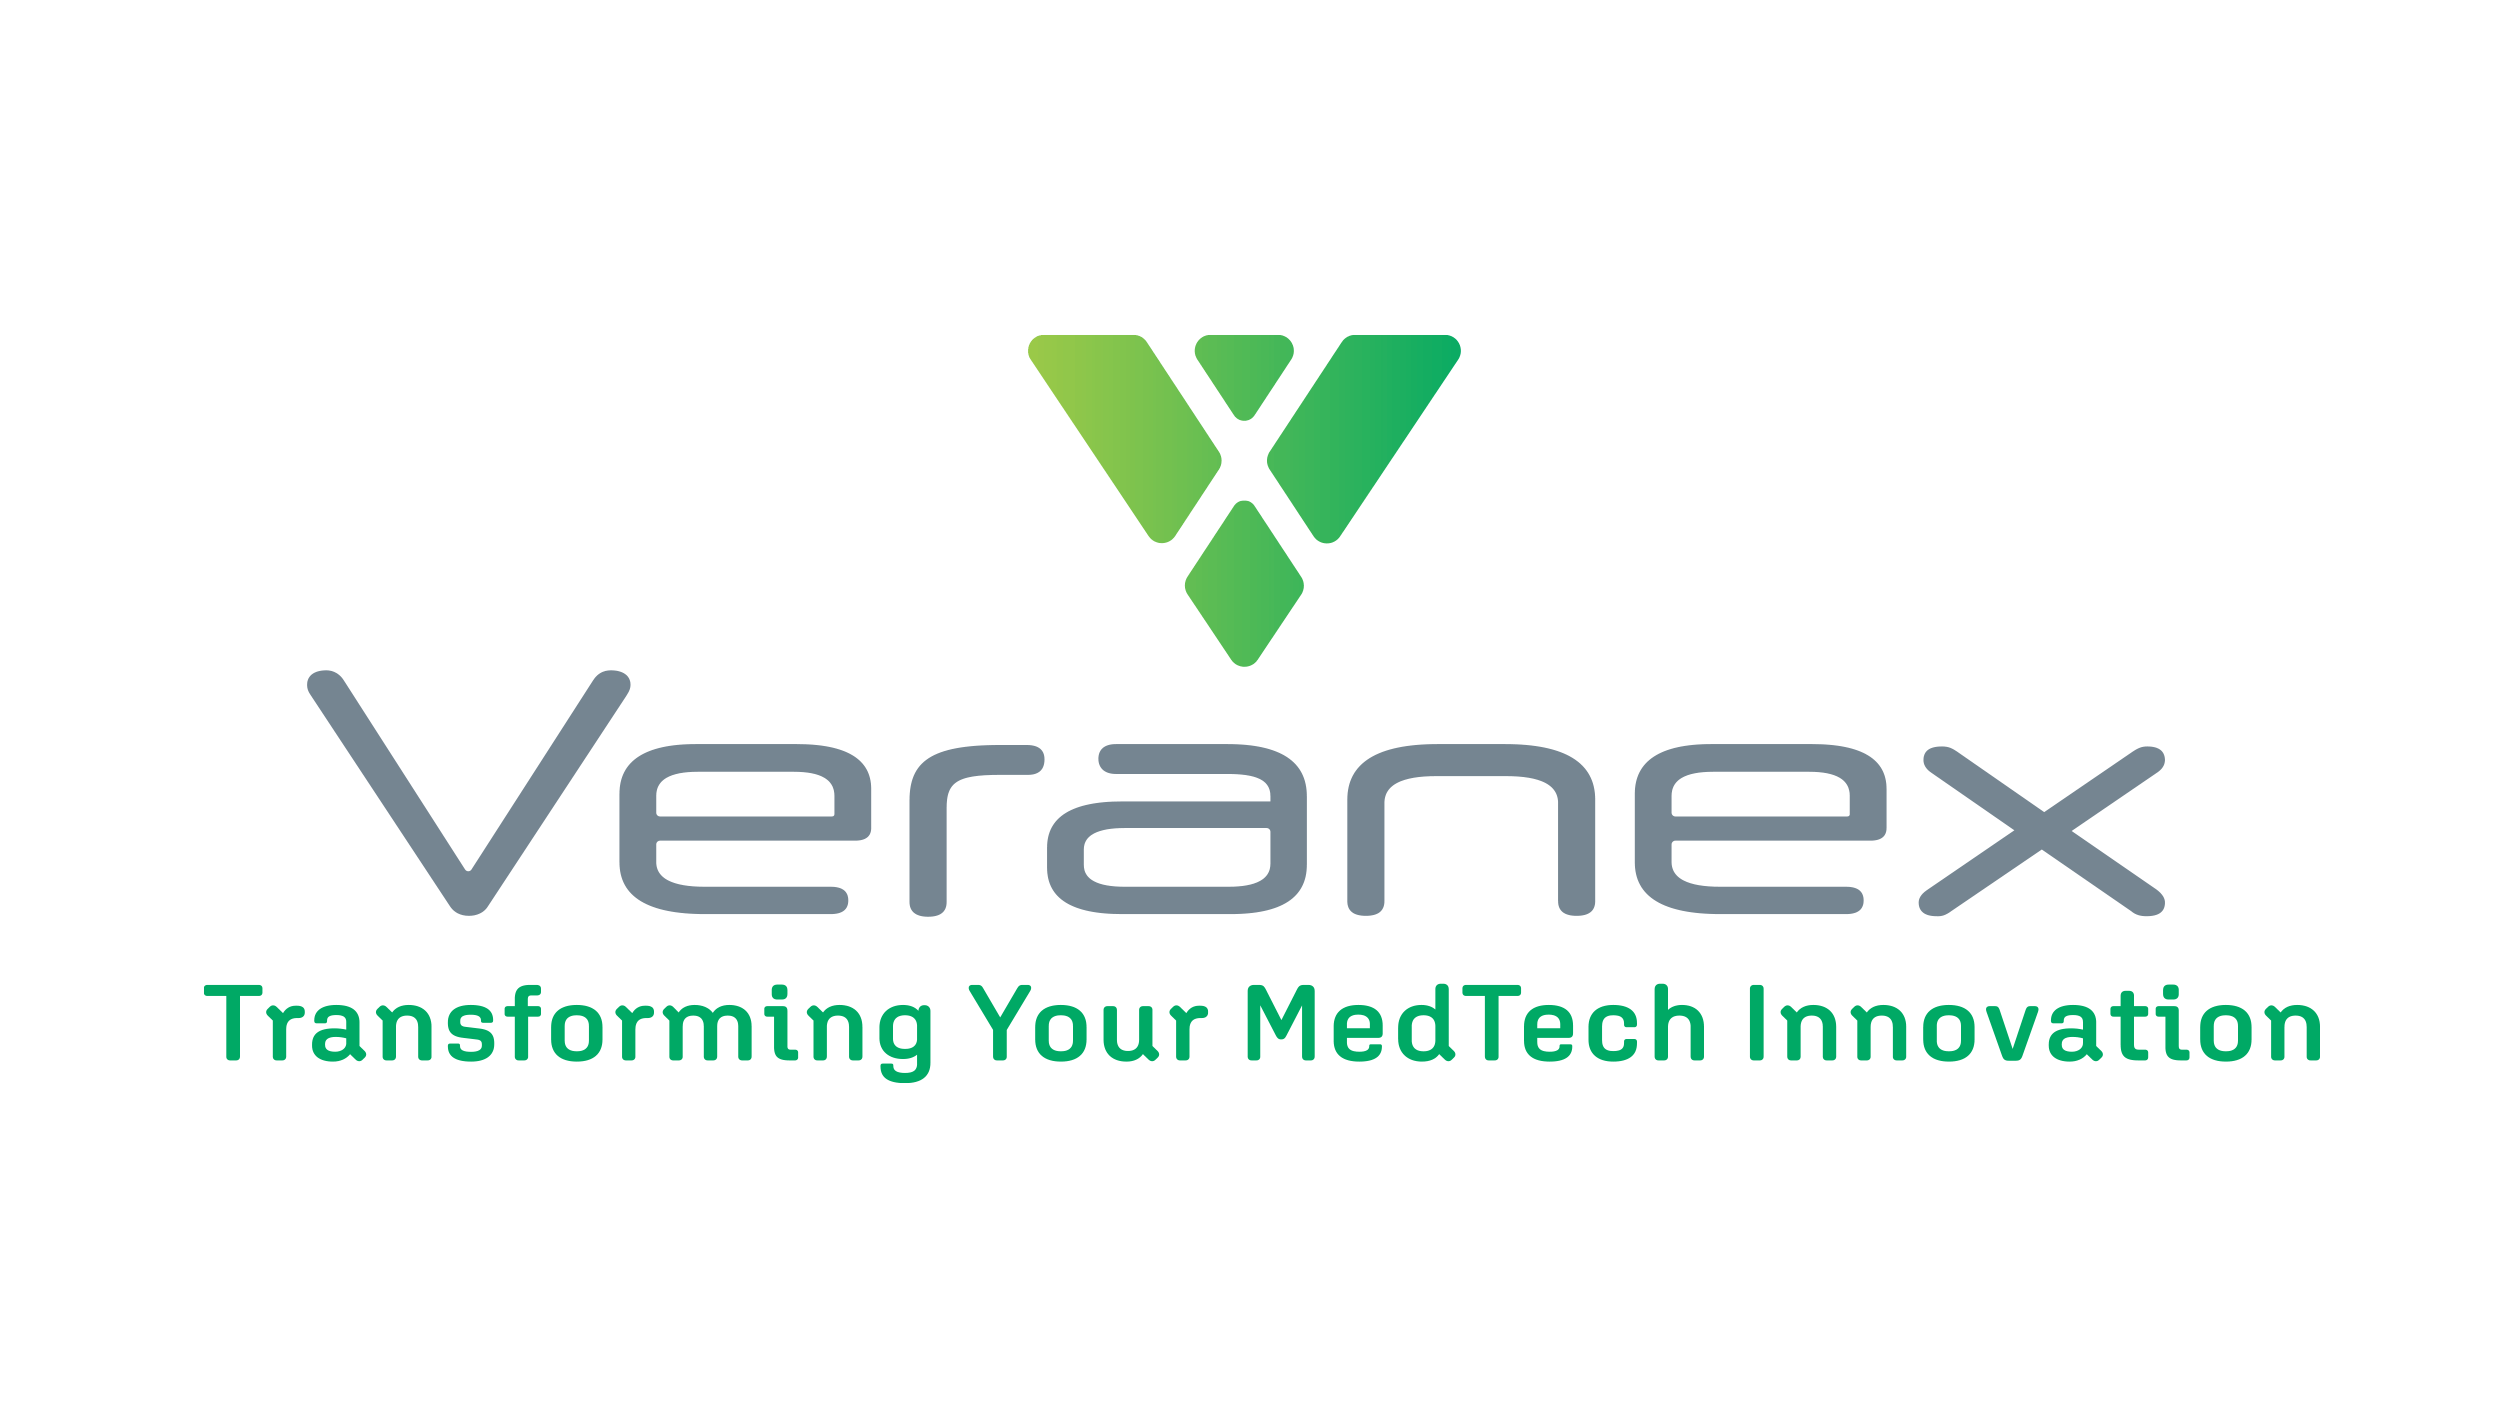 Veranex Expands European MedTech Capabilities With Acquisition of Medidee